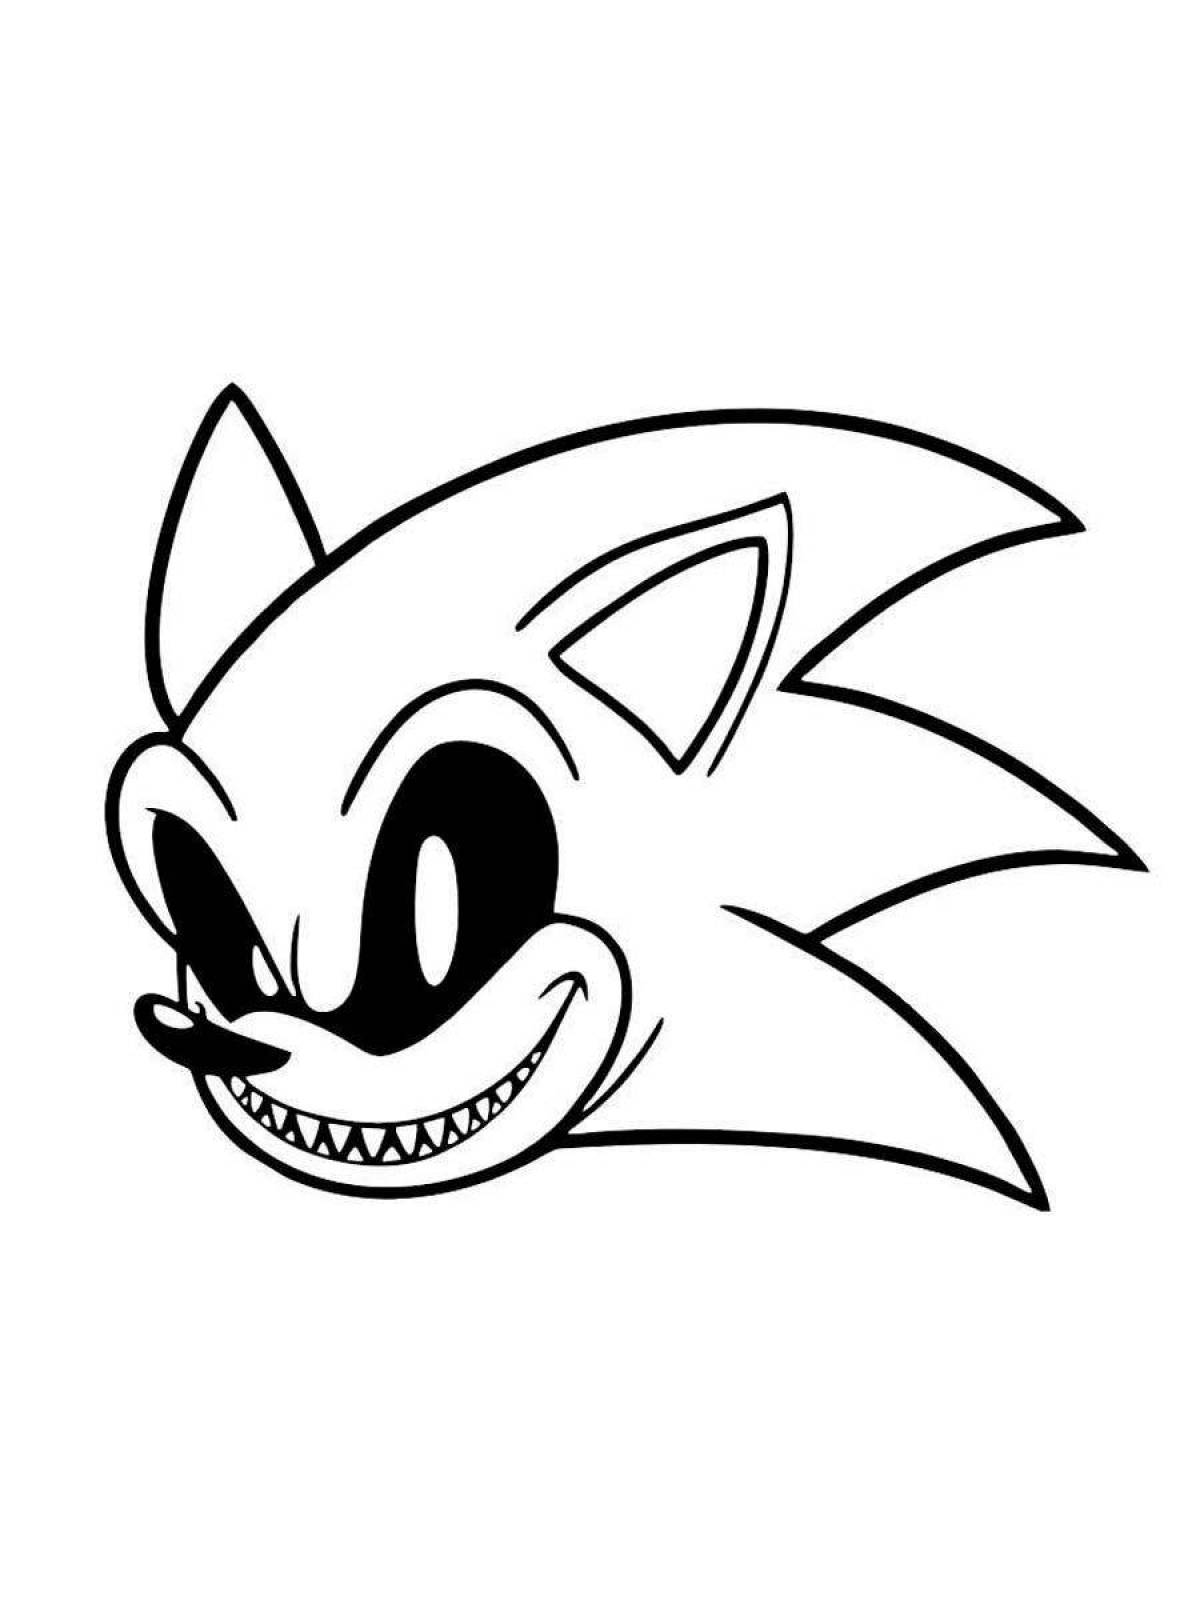 Super sonic exe bright coloring